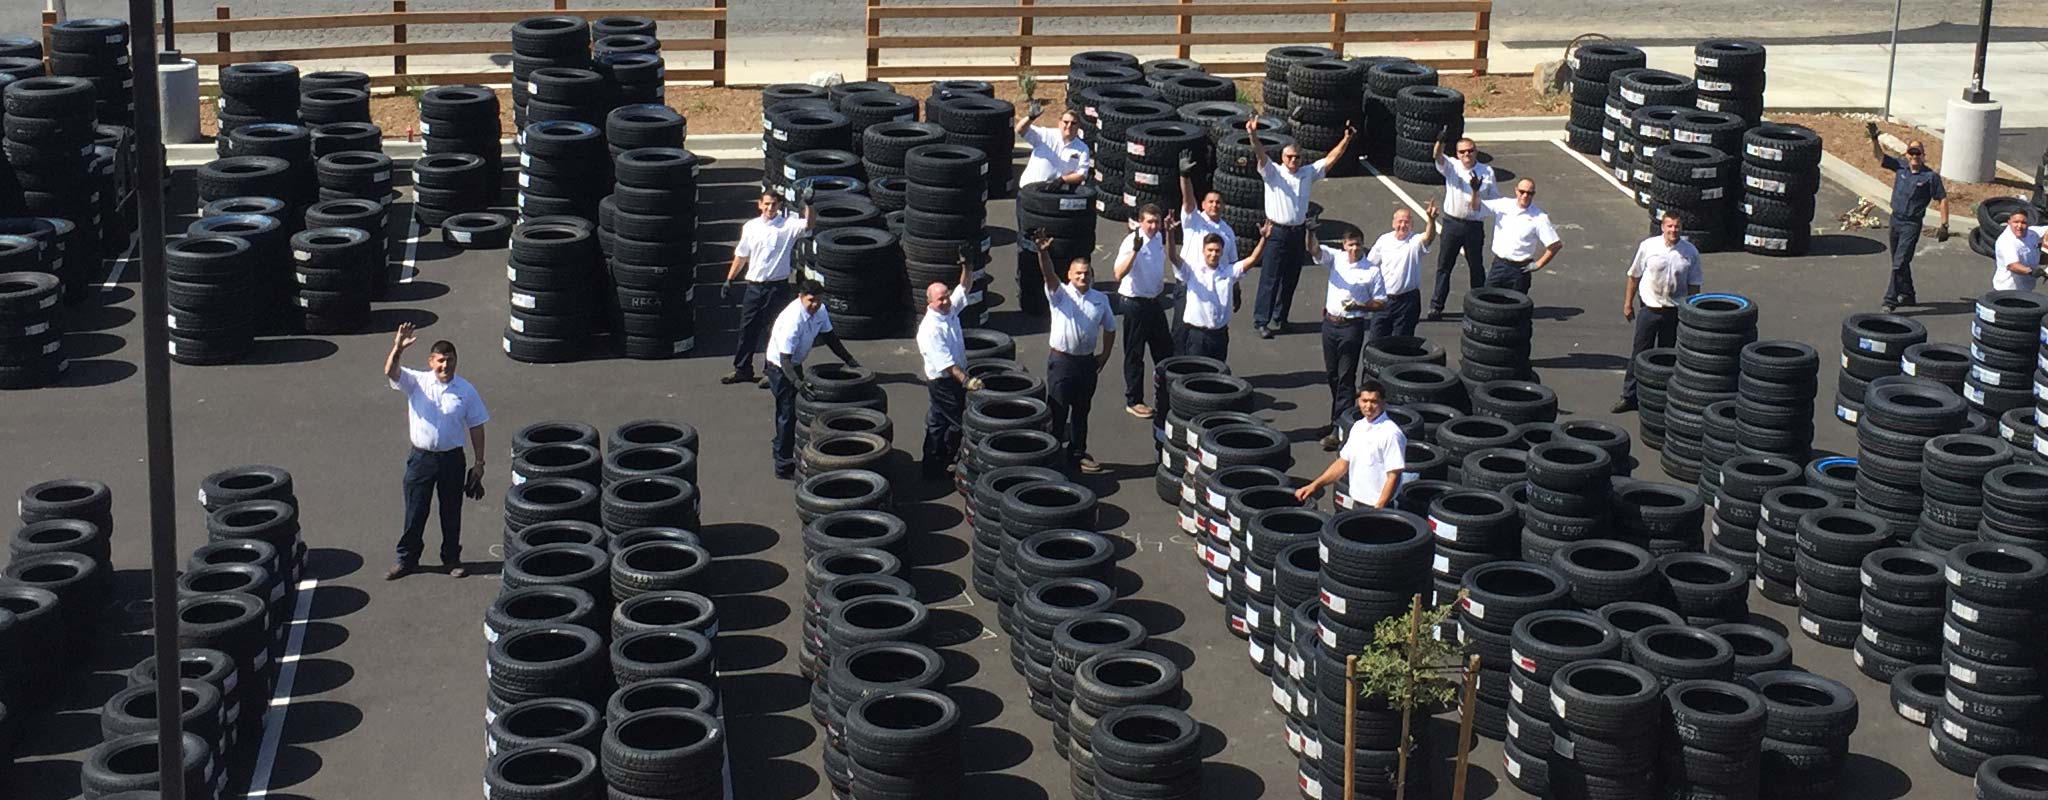 Amidst stacks of new tires, Les Schwab employees wave hi from the parking lot of the Norco location.